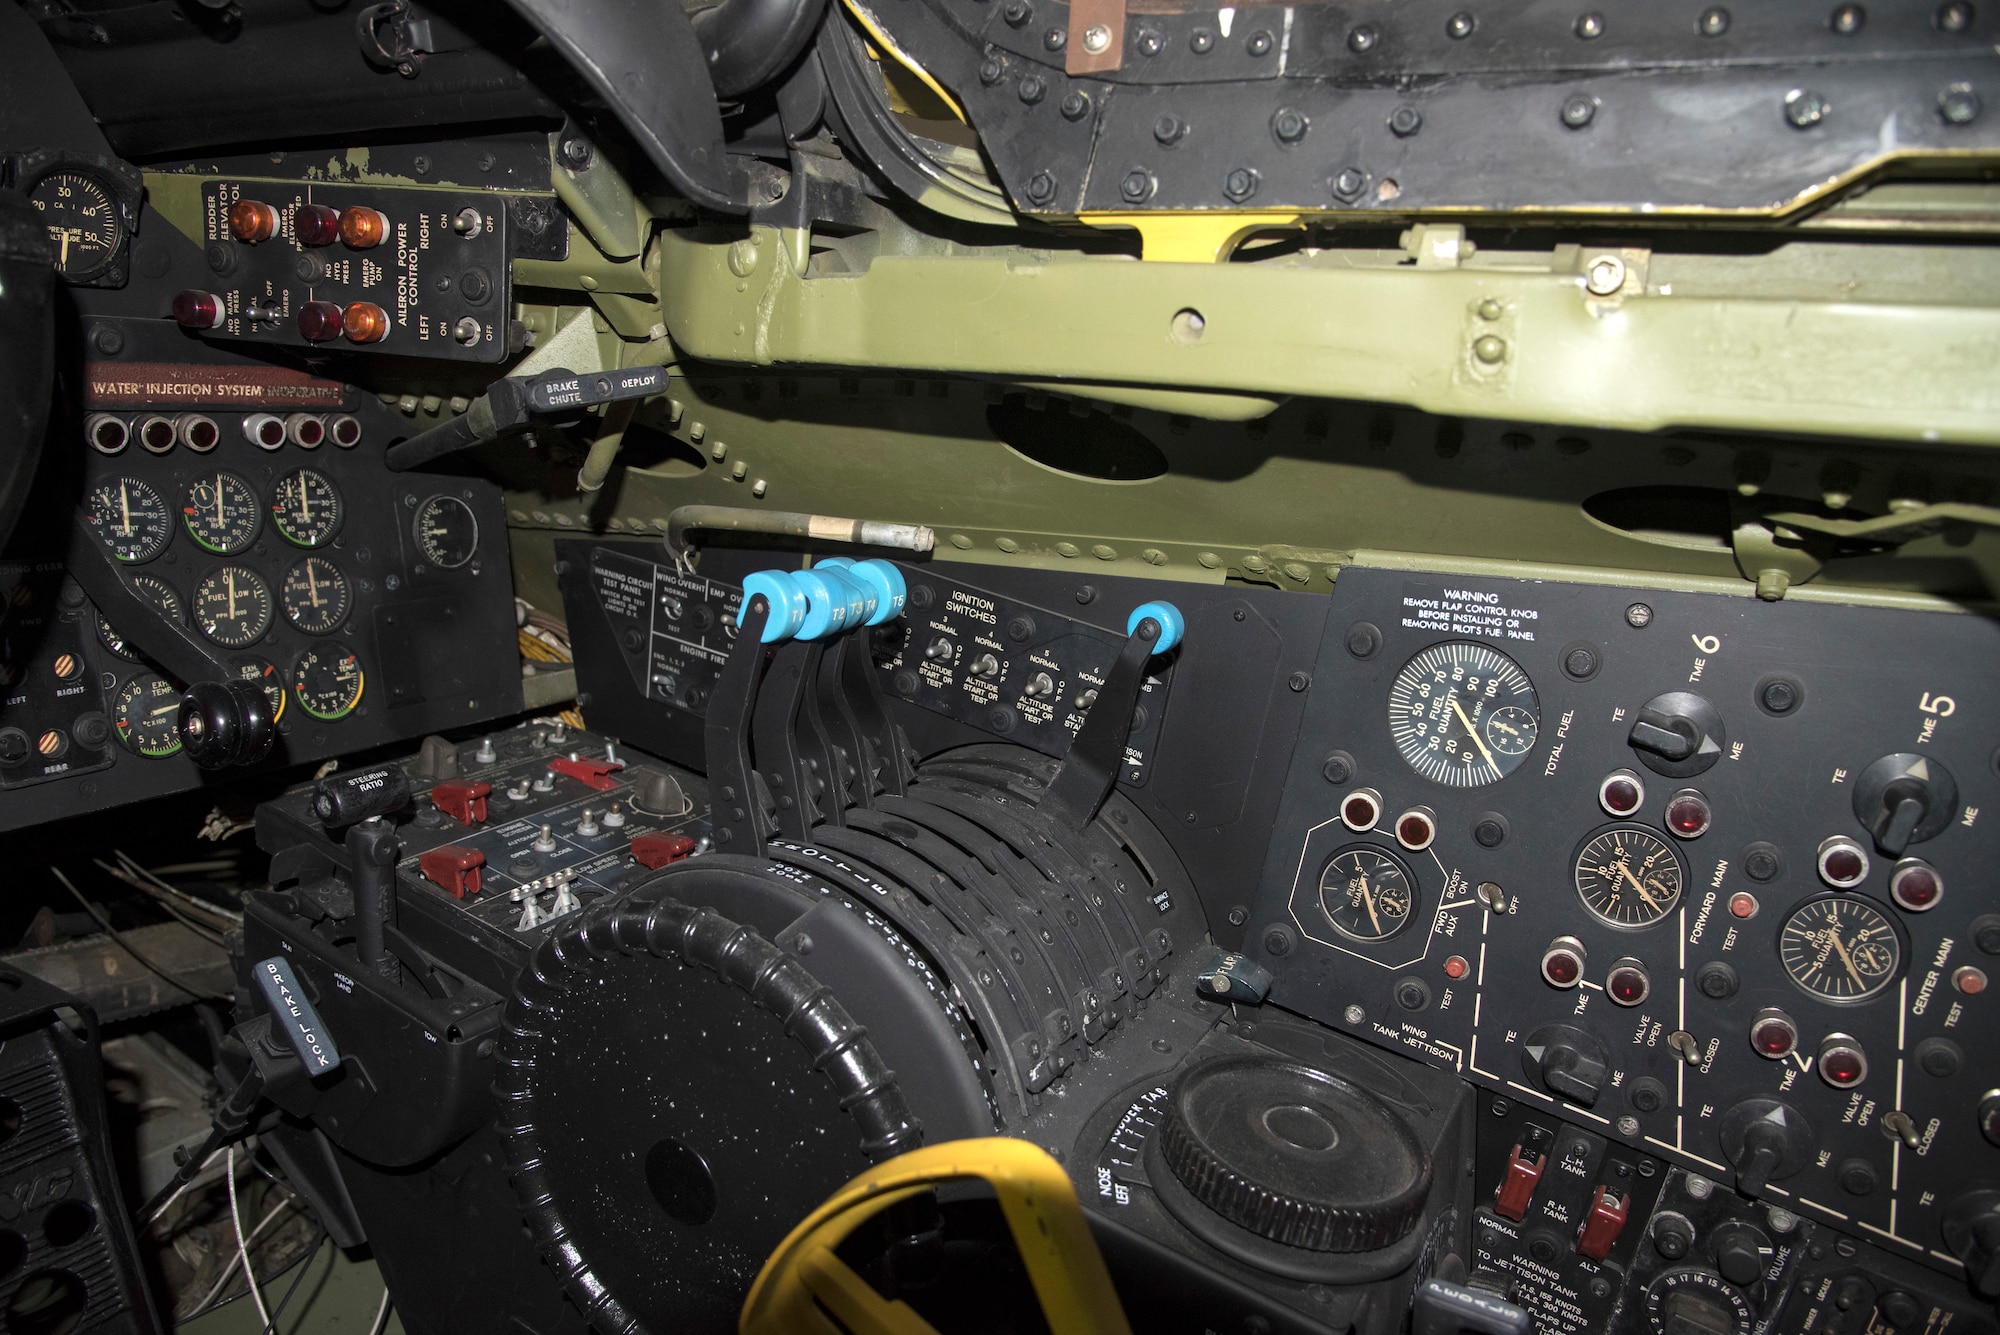 DAYTON, Ohio -- Boeing RB-47H Stratojet pilot controls at the National Museum of the United States Air Force. (U.S. Air Force photo by Ken LaRock)